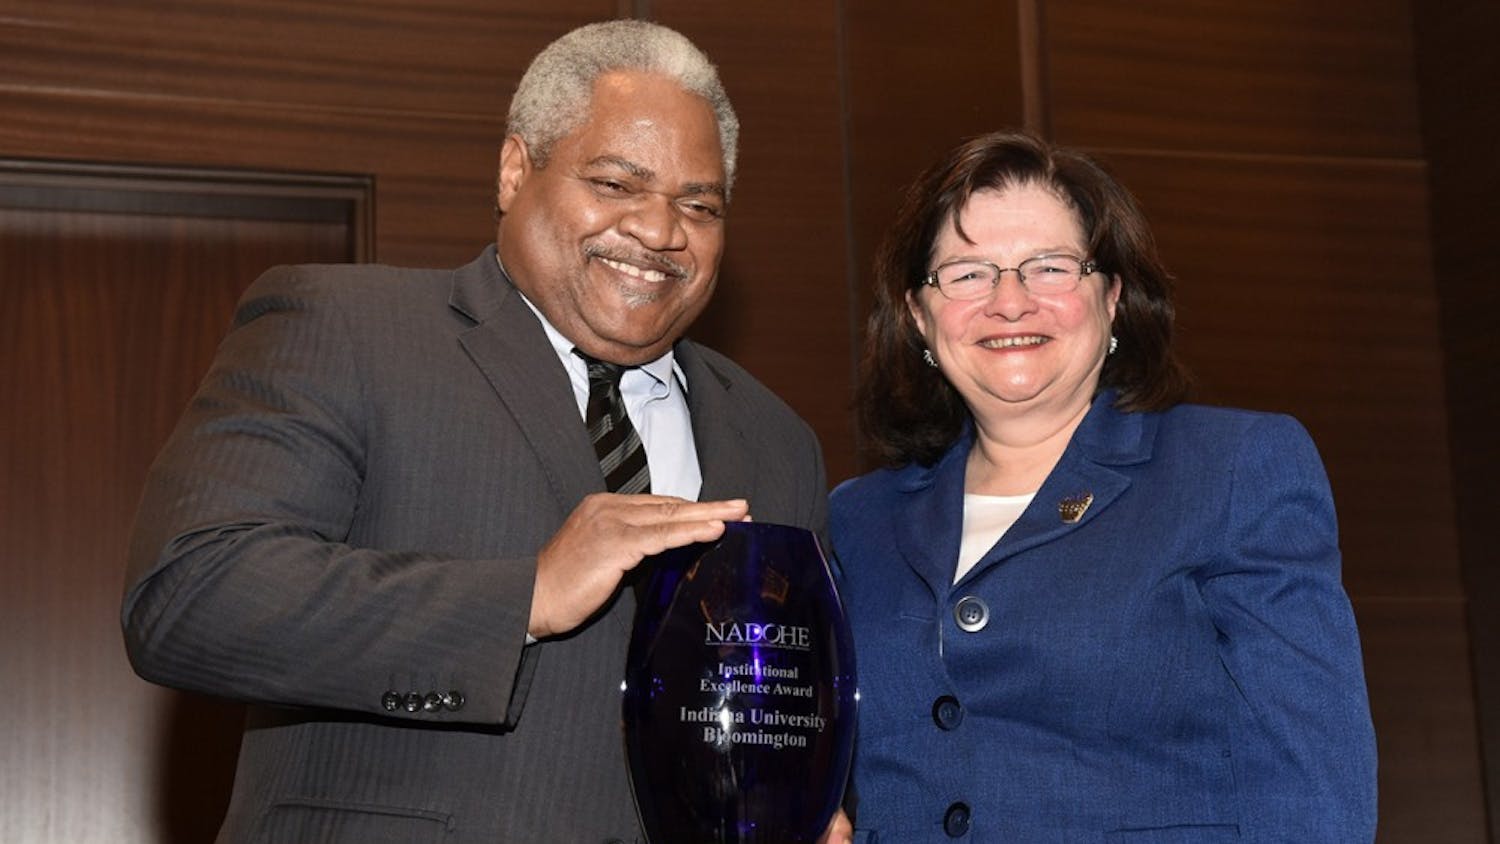 Associate Professor of Business Law&nbsp;Martin McCrory, left, accepts the Institutional Excellence Award from awards chair Carmen Suarez. IU announced that McCrory will resign from his position as&nbsp;associate vice president for the Office of the Vice President for Diversity, Equity and Multicultural Affairs.